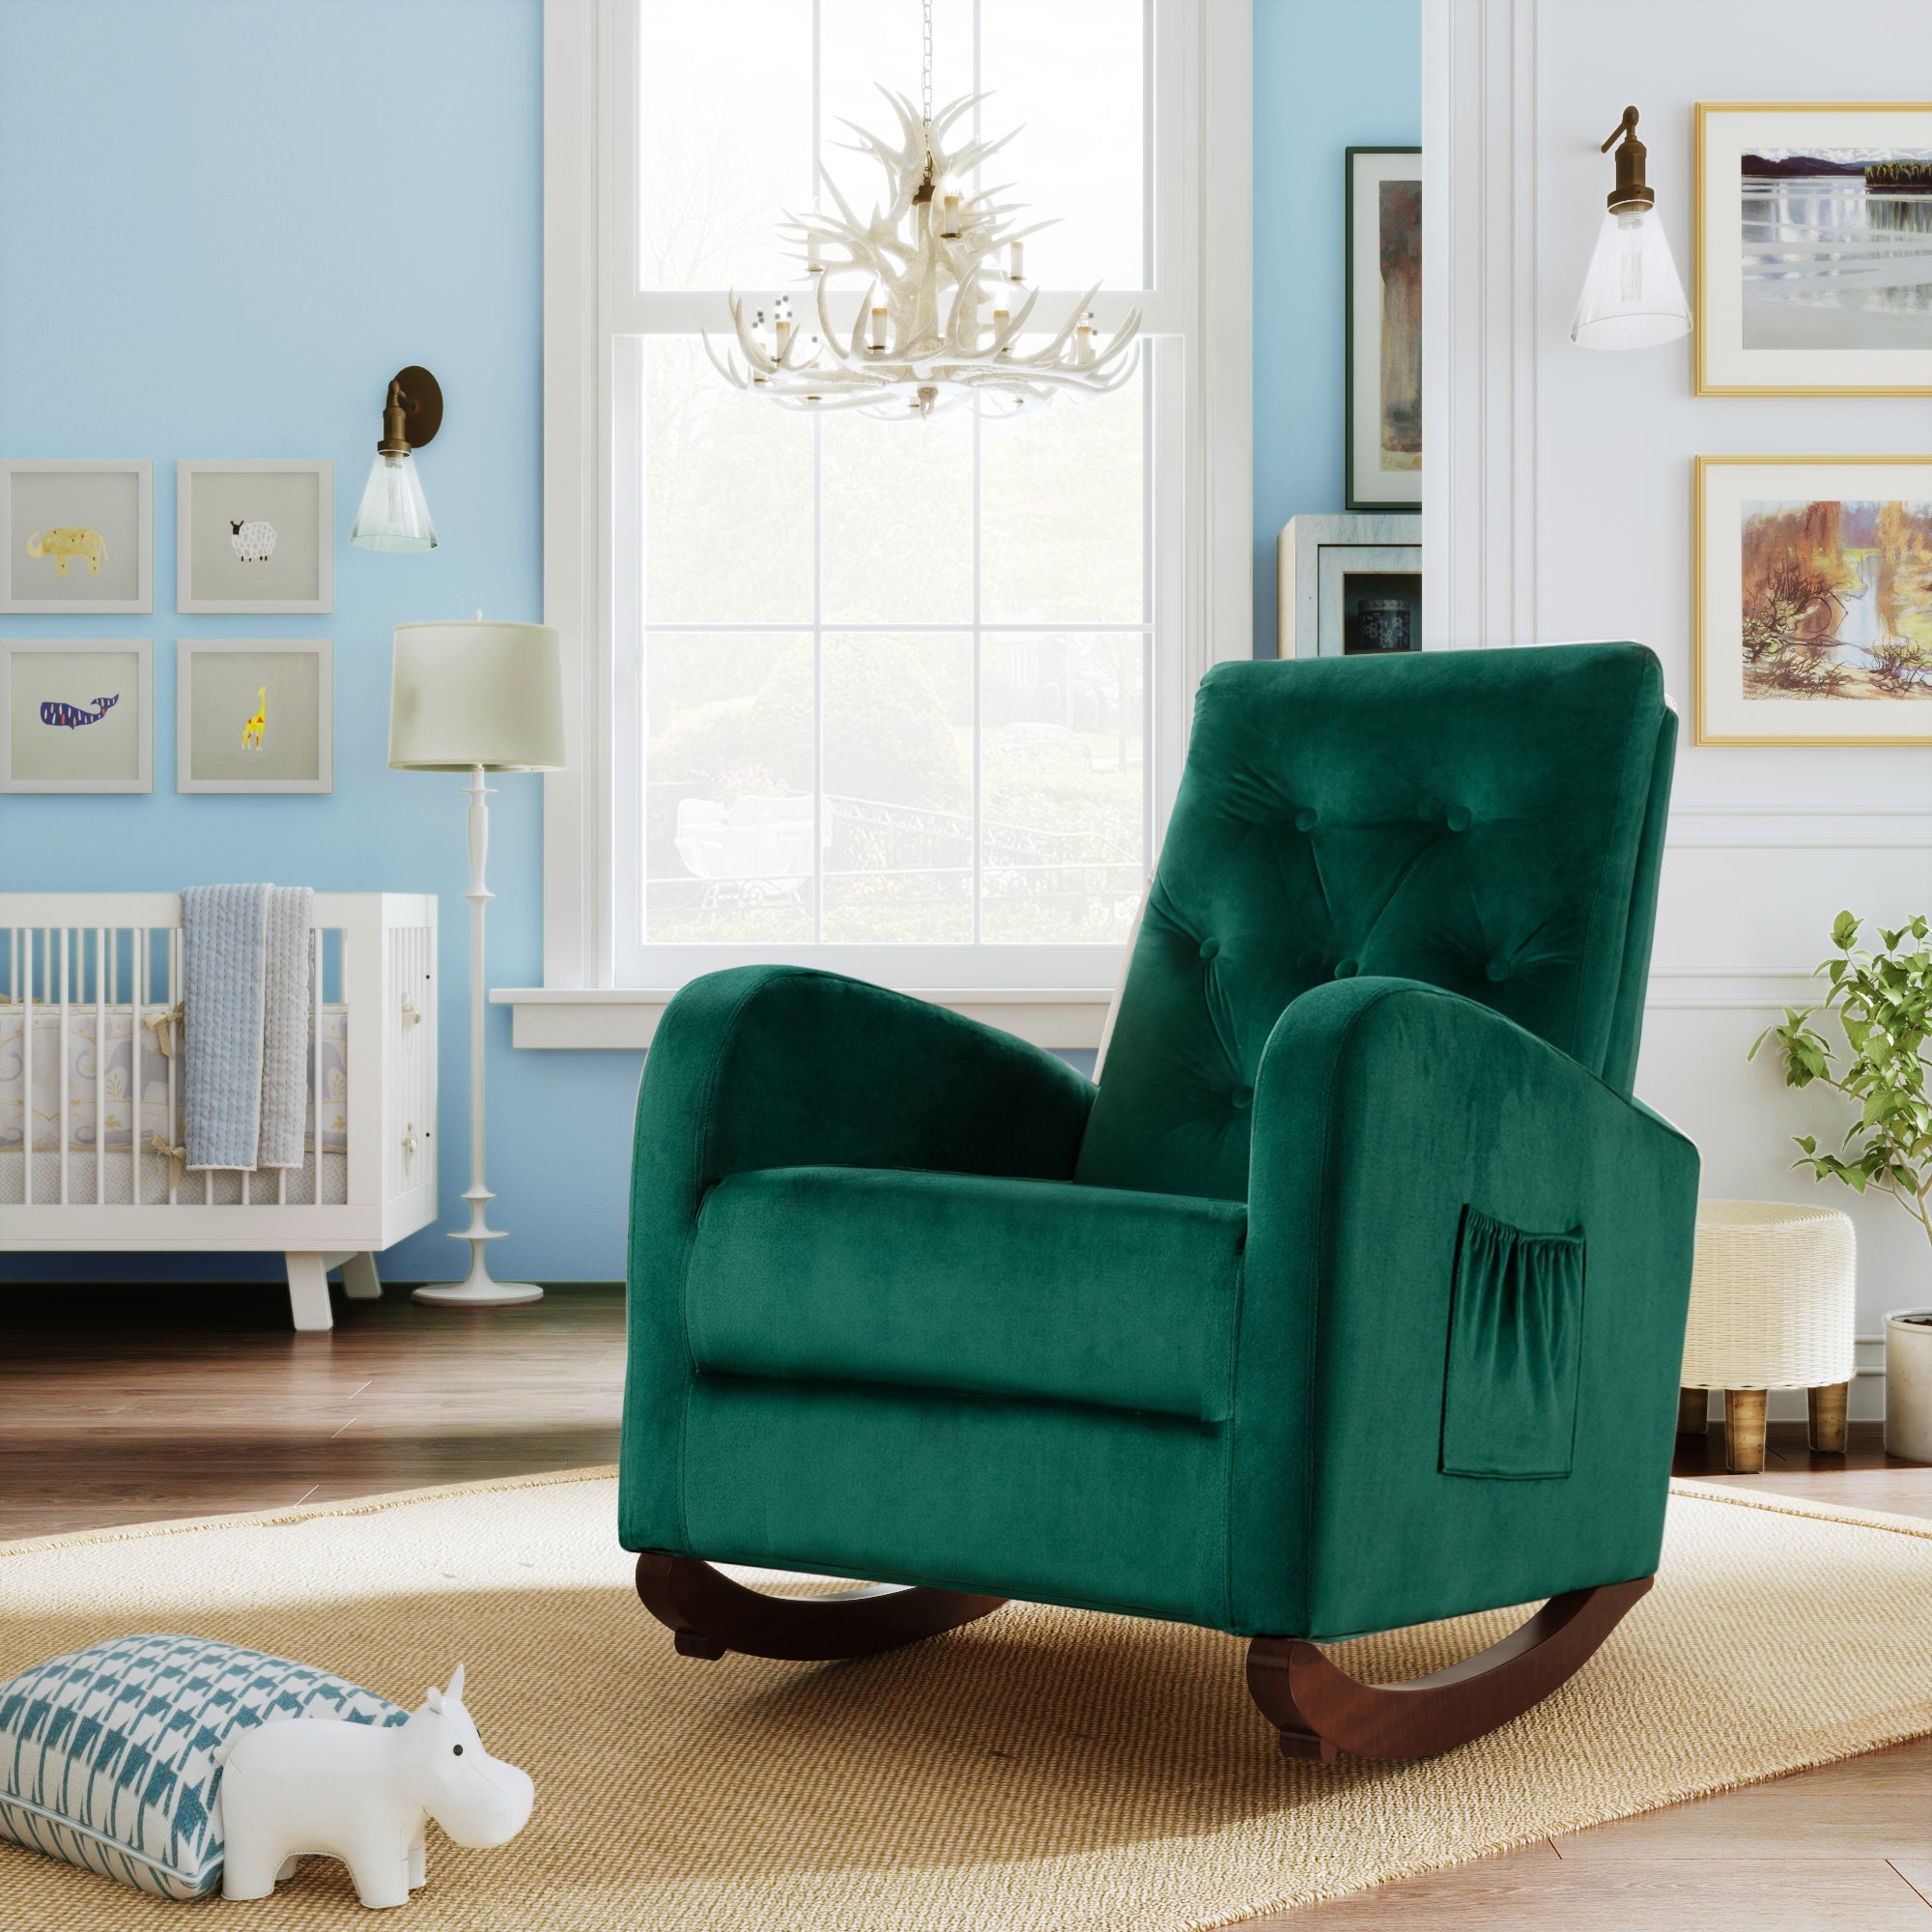 High Back Rocking Chair Nursery Chair with Thick Padded Seat & Side Pockets, Green